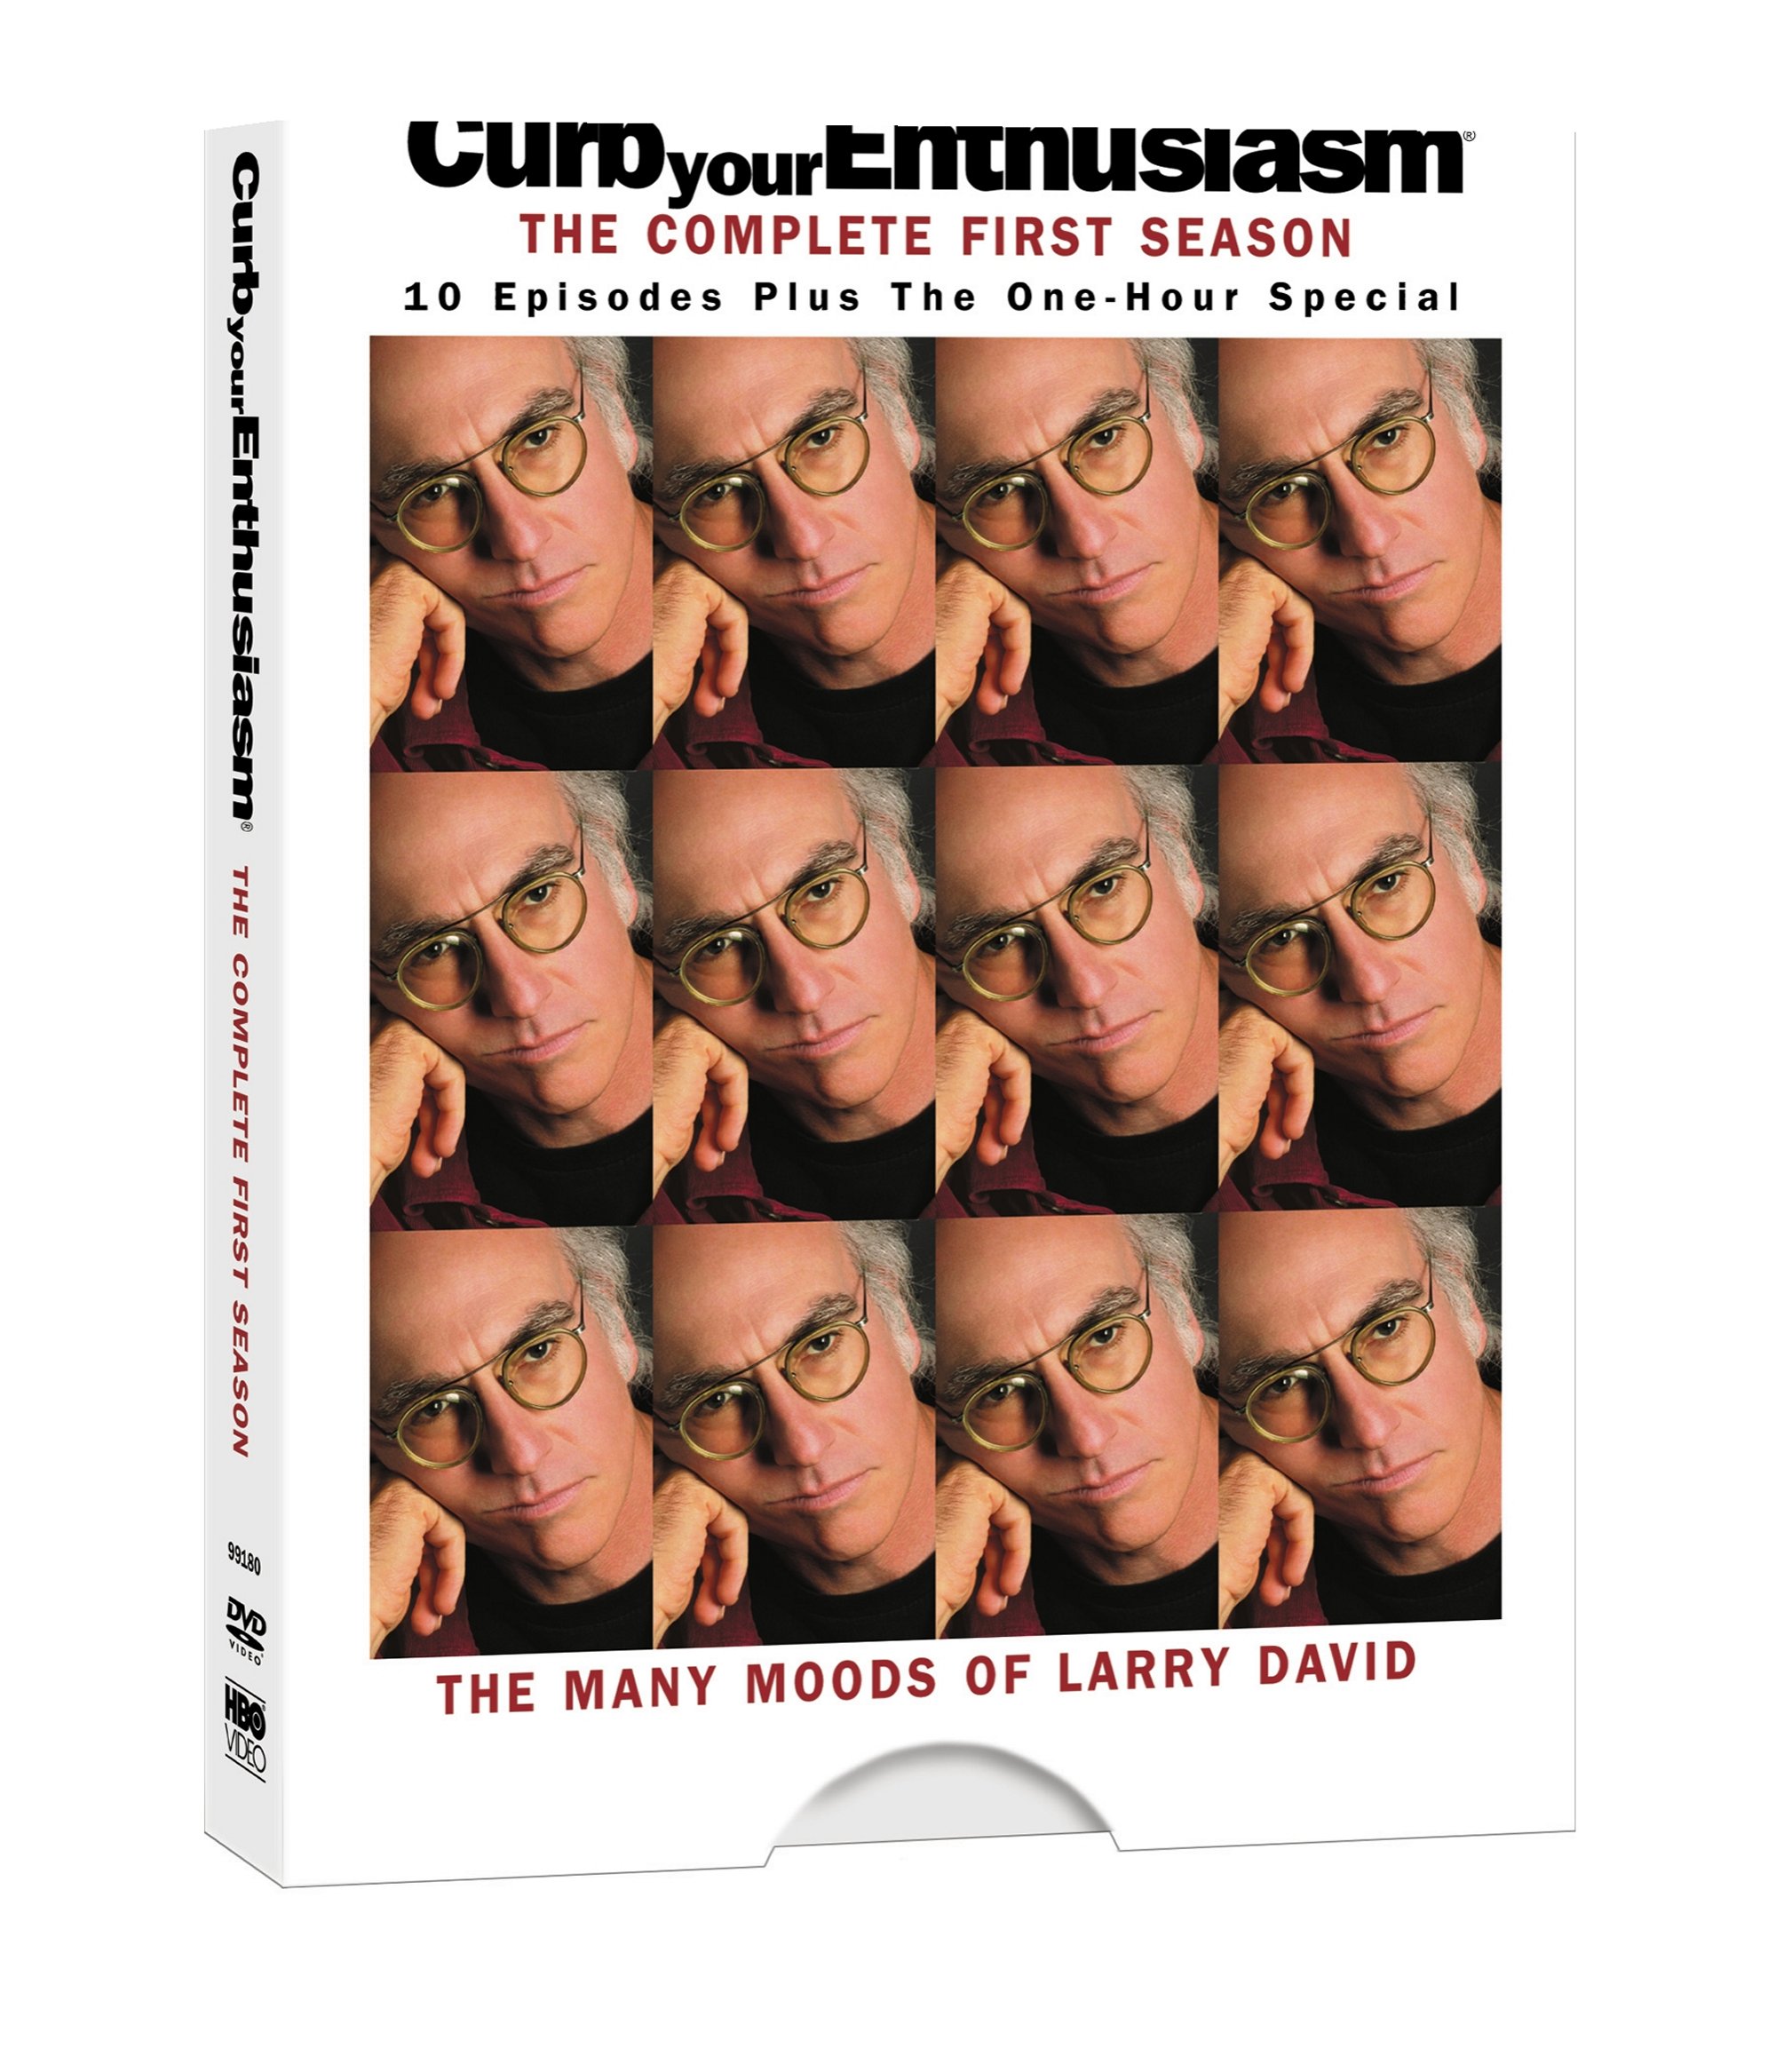 Curb Your Enthusiasm: The Complete First Season (DVD New Box Art) - DVD [ 2000 ]